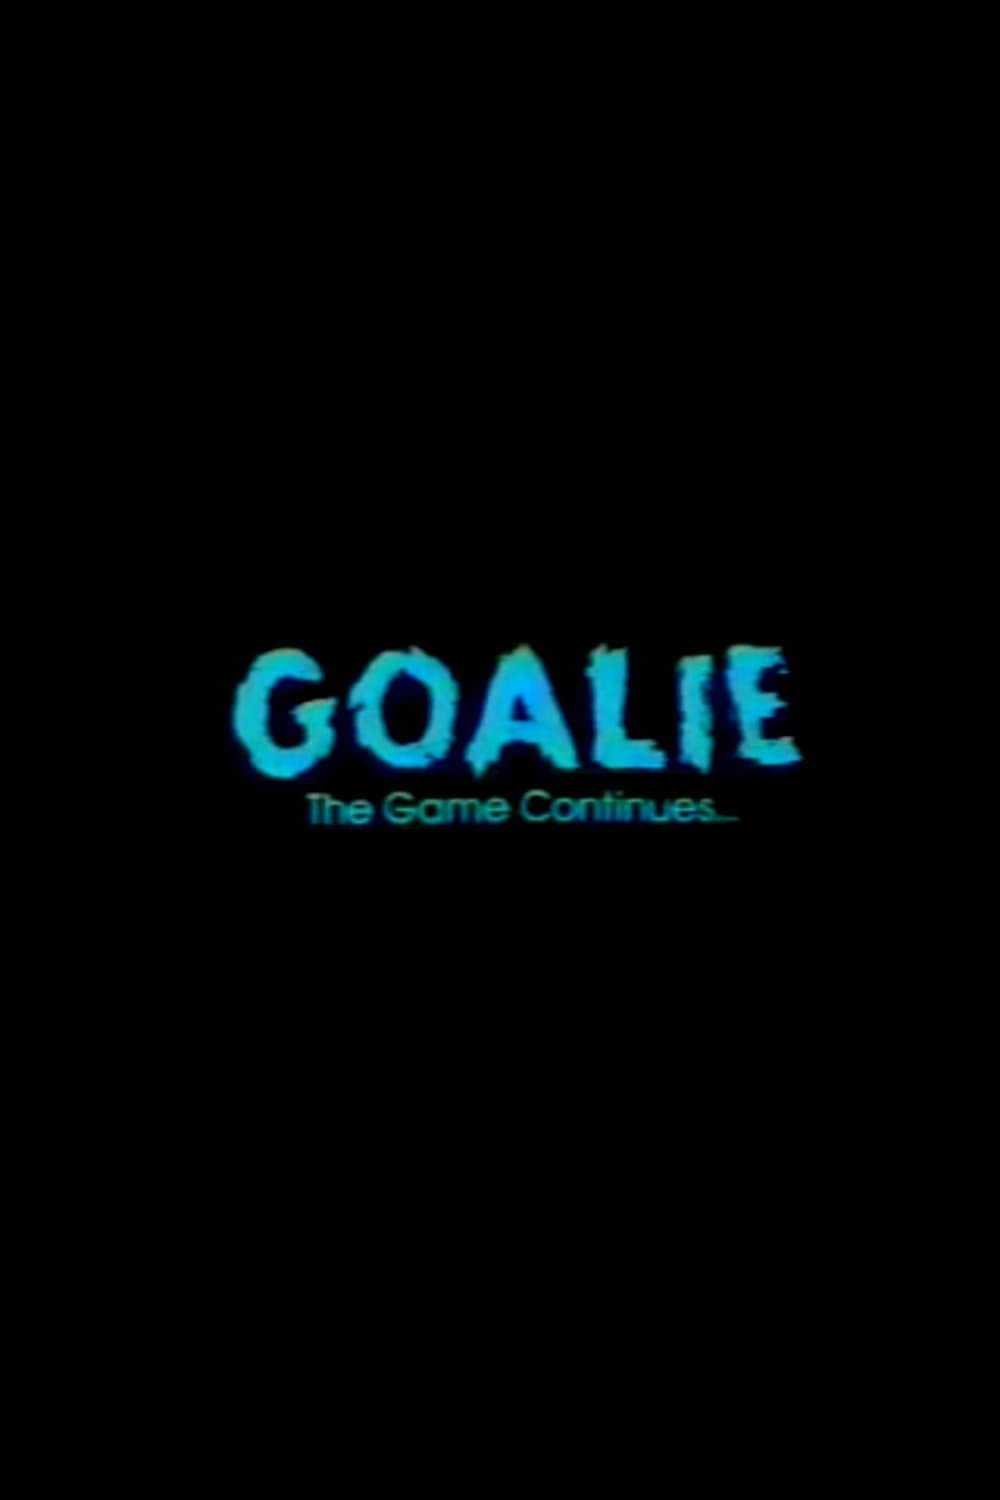 Goalie: The Game Continues